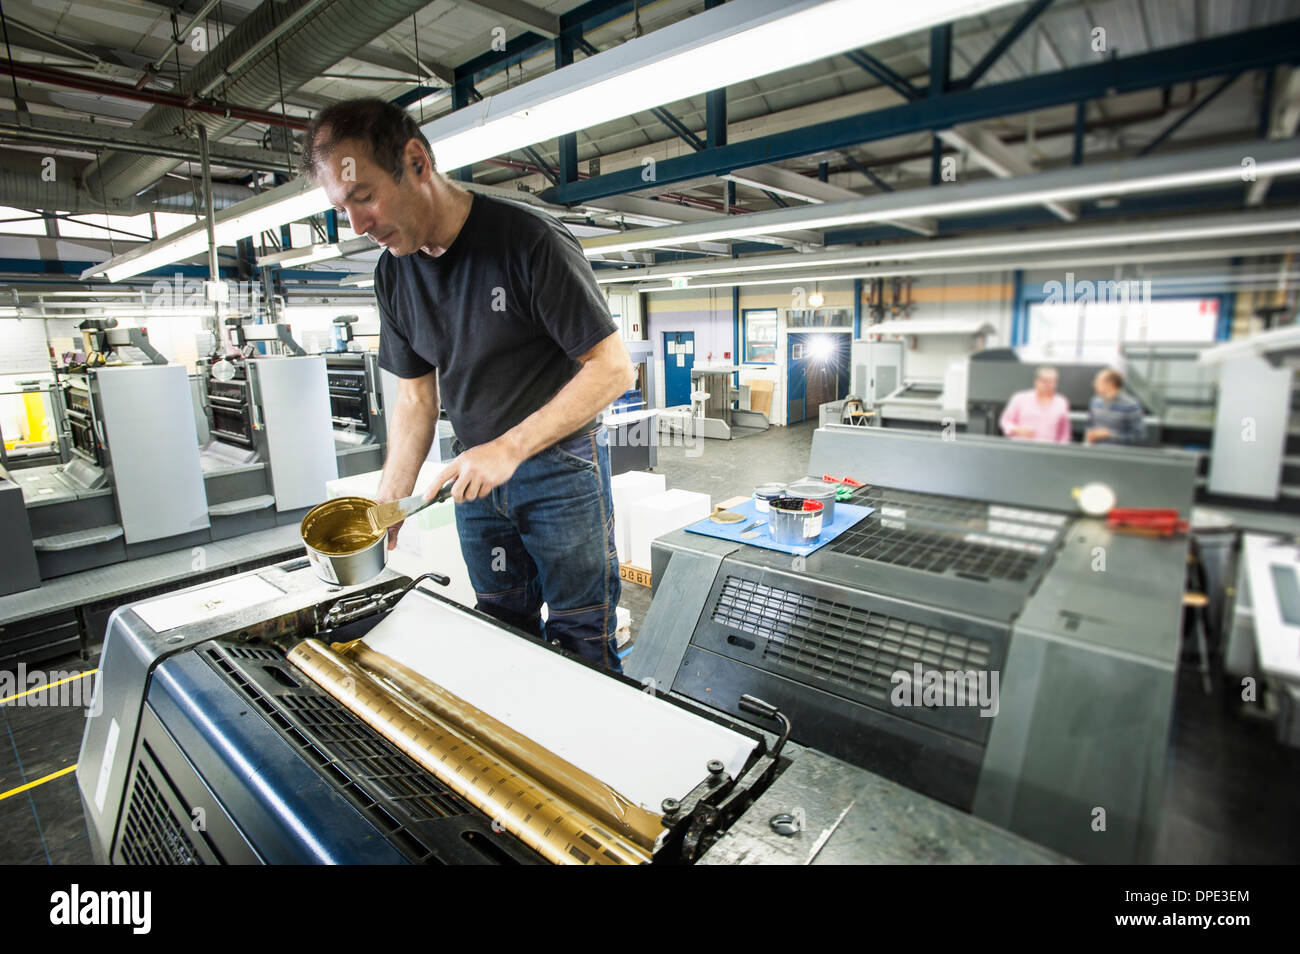 Worker applying gold ink to printing machine in print workshop Stock Photo